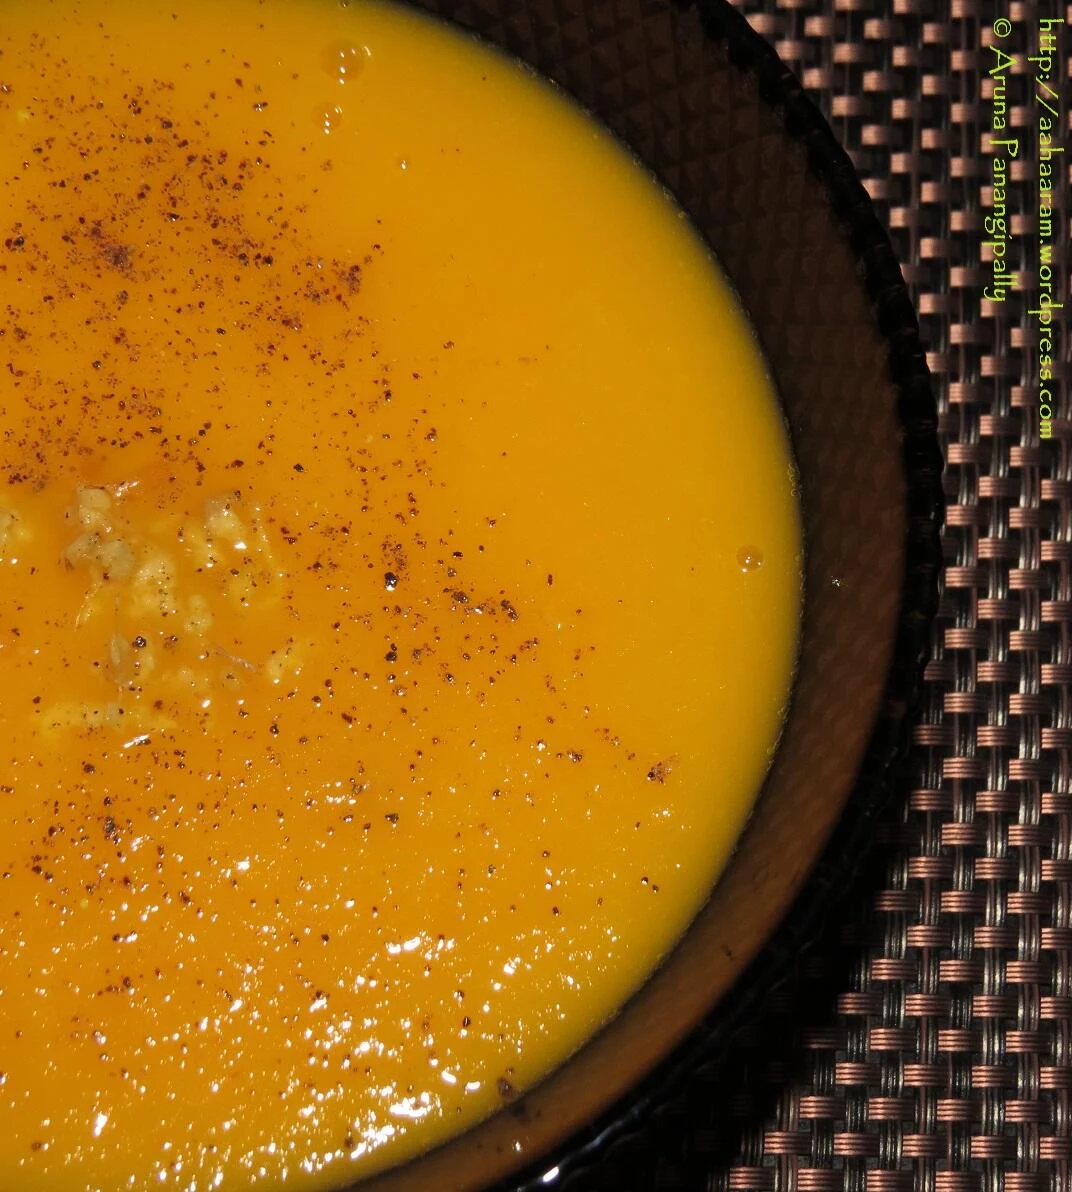 Carrot and Ginger Soup with a Dash of Orange